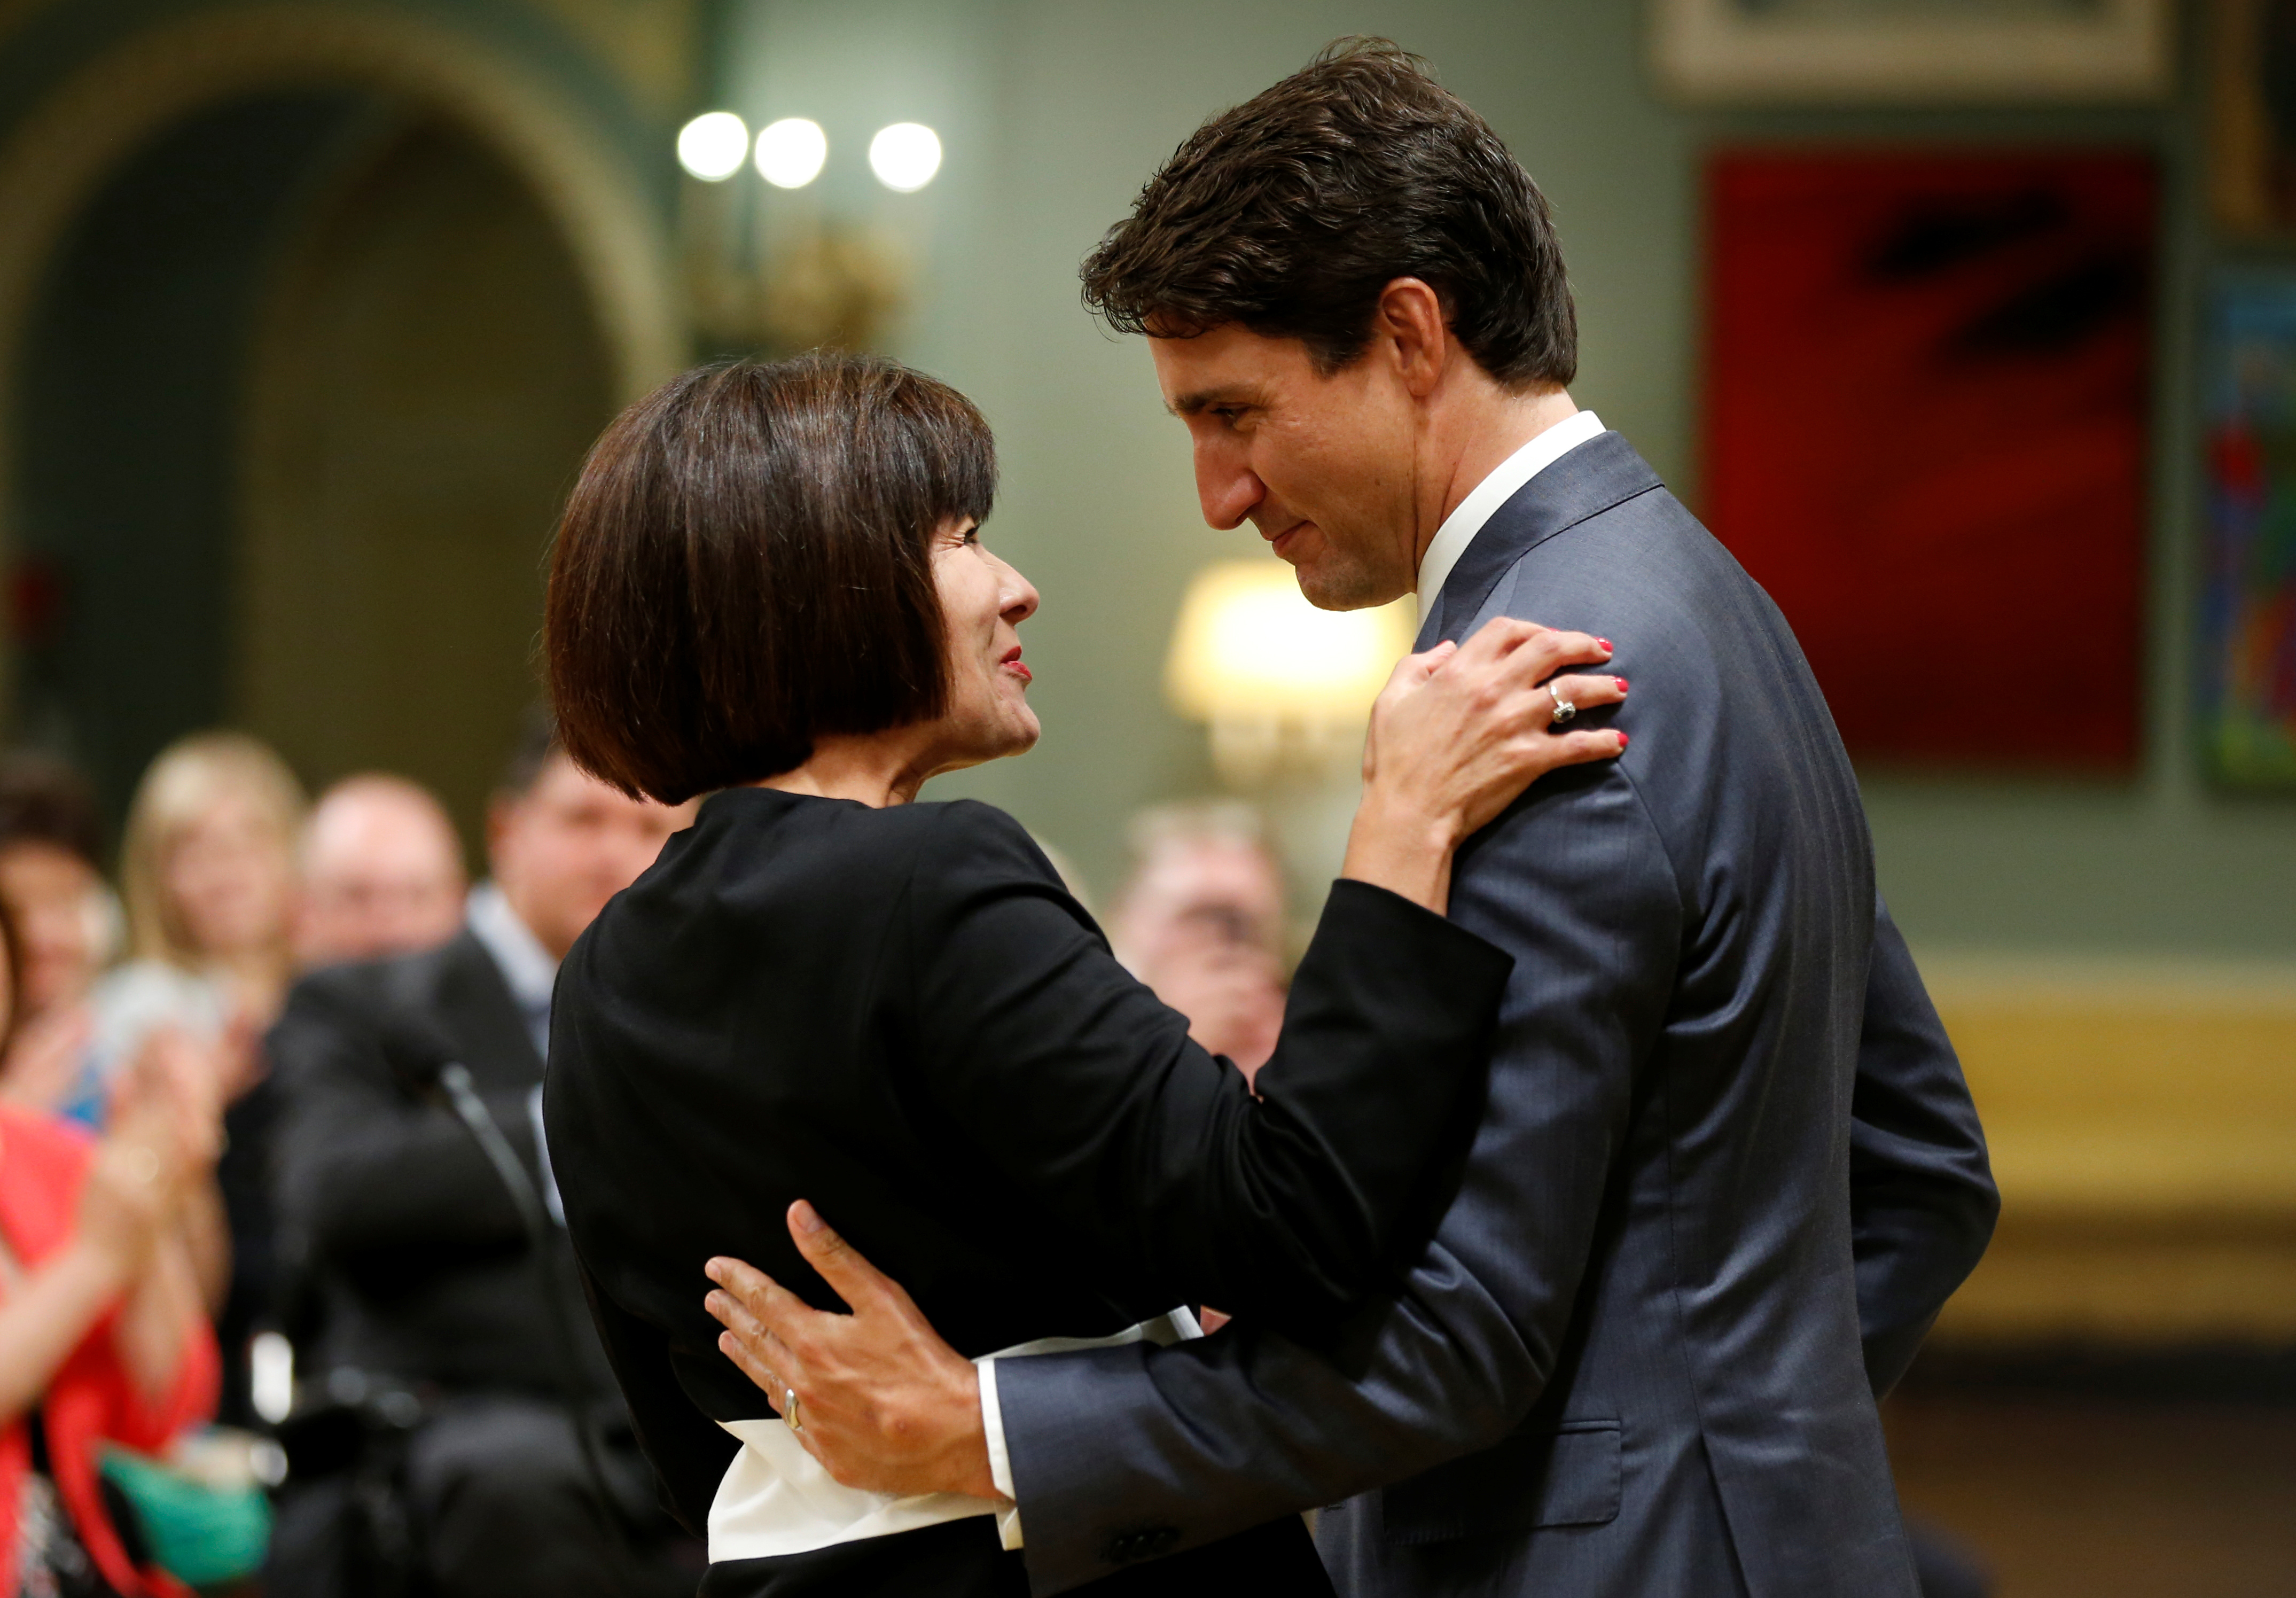 Canada's Prime Minister Justin Trudeau (R) congratulates Ginette Petitpas Taylor after she was sworn-in as Canada's Minister of Health during a cabinet shuffle at Rideau Hall in Ottawa, Ontario, Canada, August 28, 2017. REUTERS/Chris Wattie 